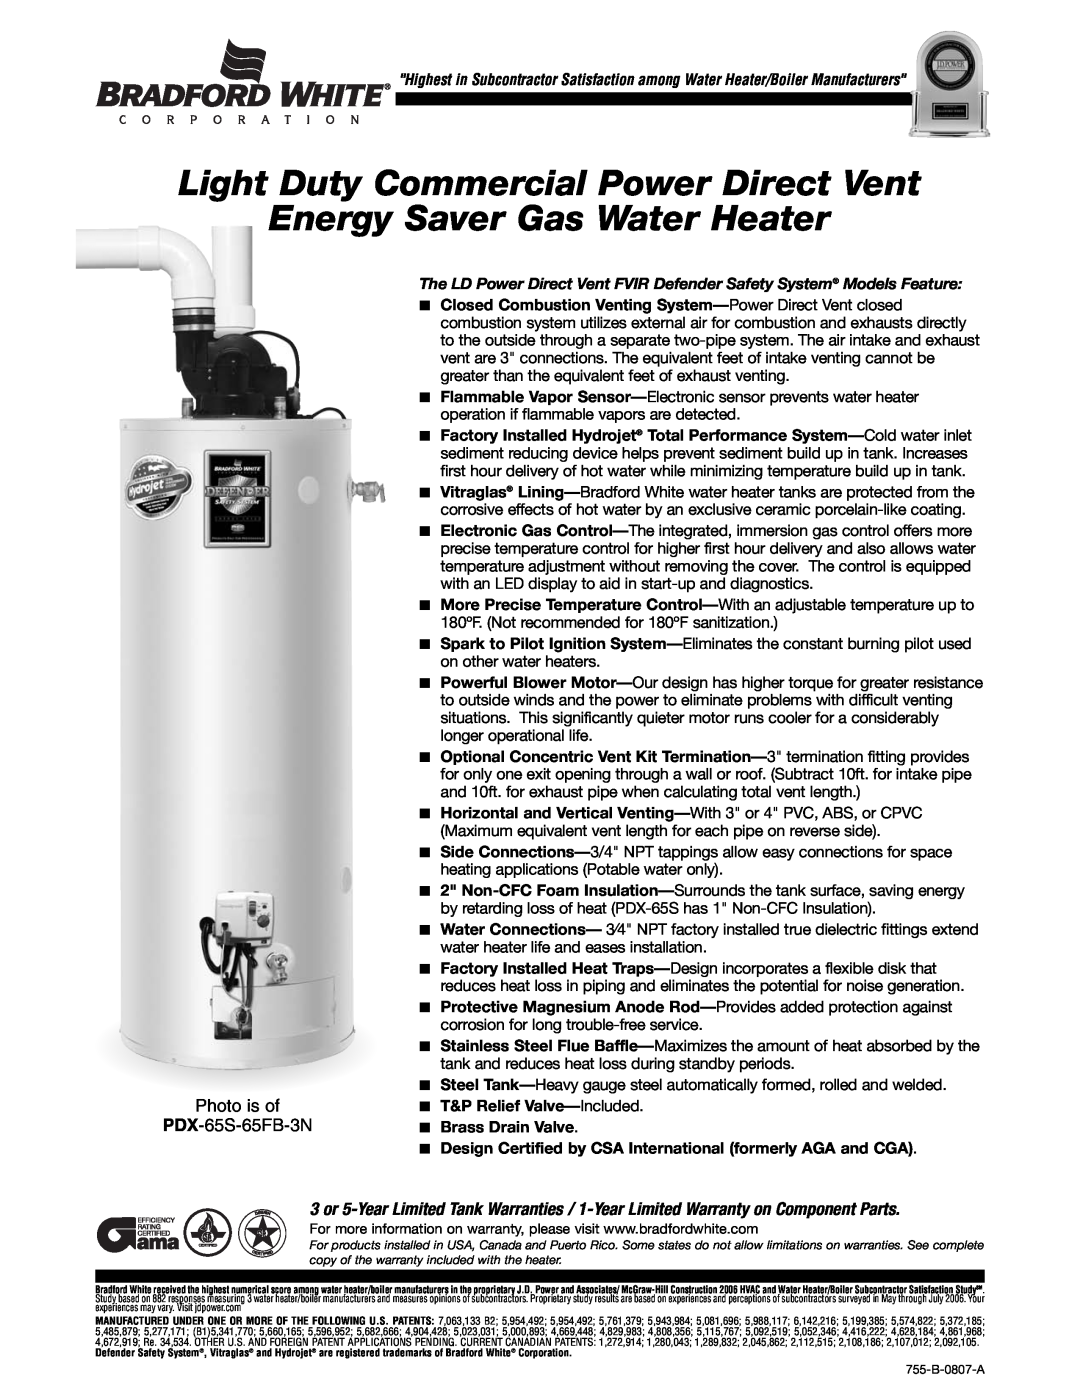 Bradford-White Corp PDX-65S-65FB-3N warranty Light Duty Commercial Power Direct Vent Energy Saver Gas Water Heater 